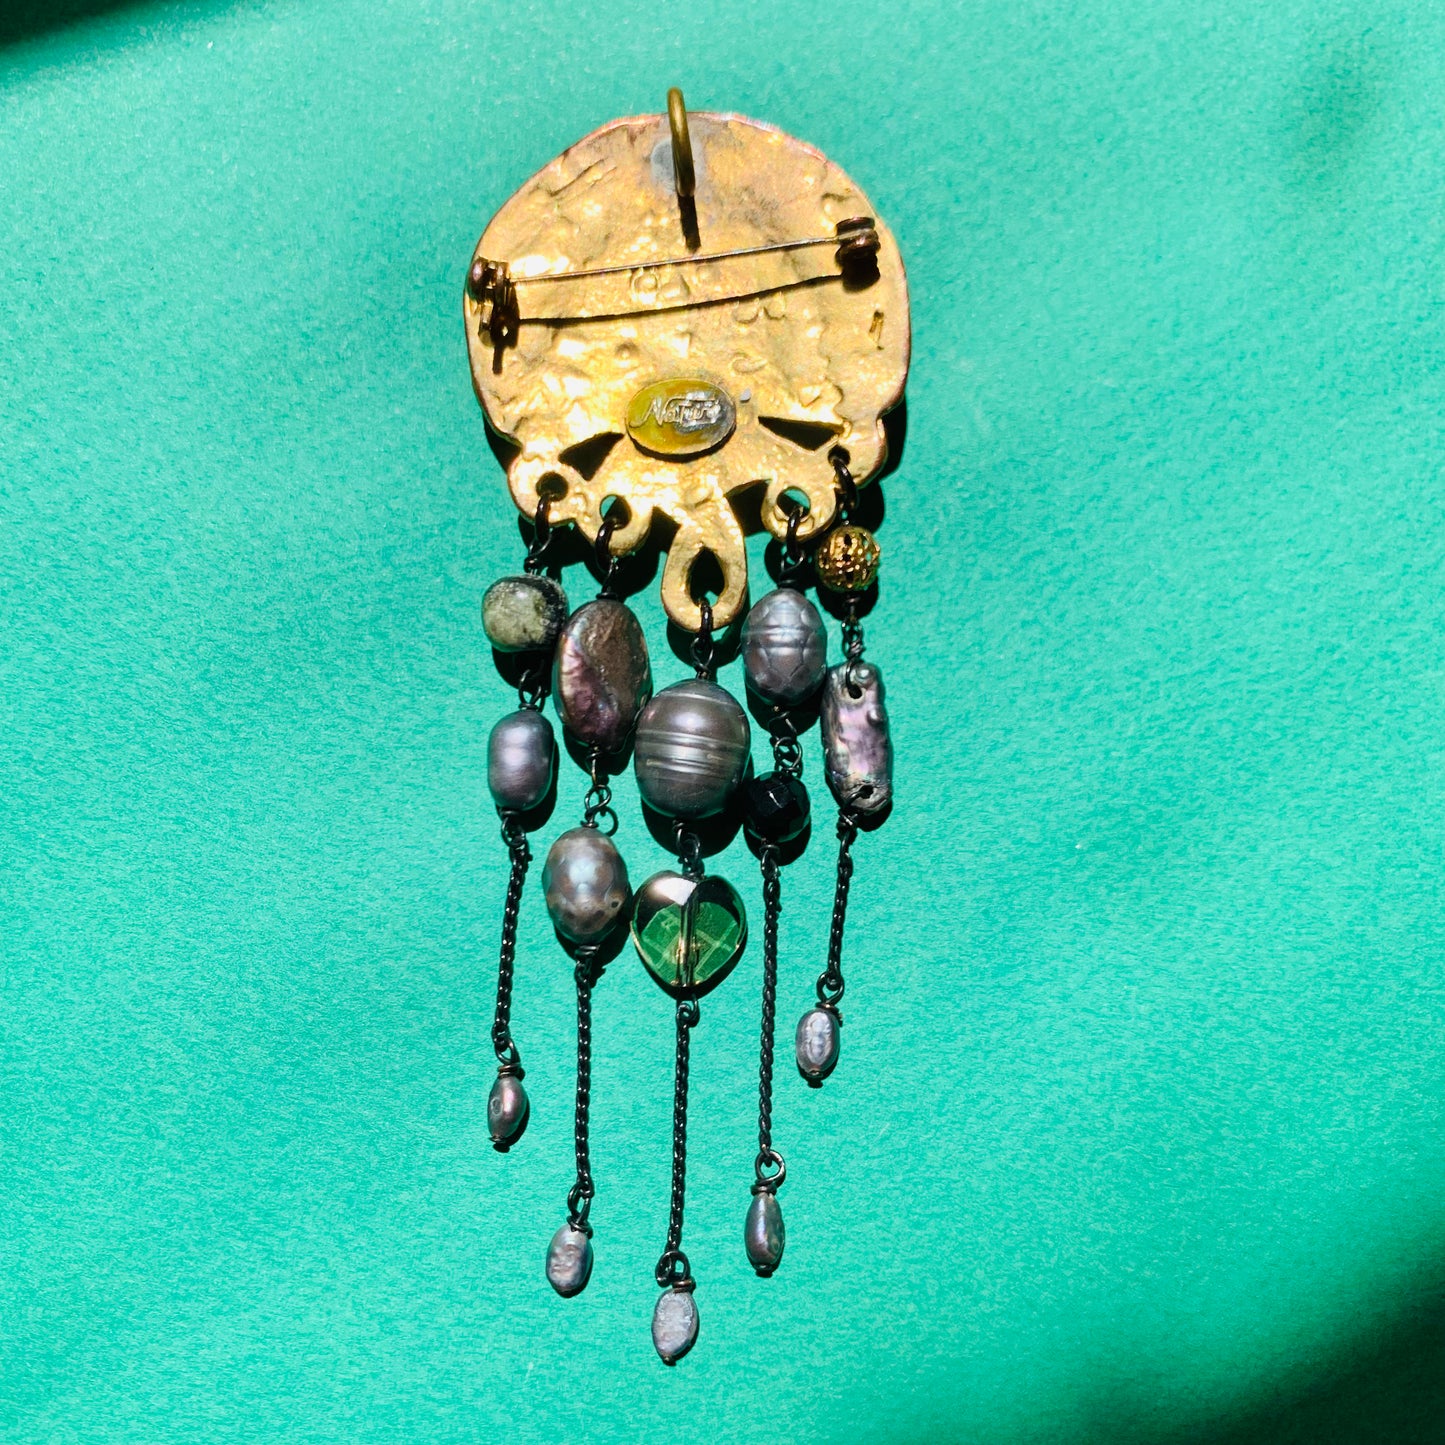 Extremely rare 1980s Nature Bijoux hand made metal enamel jelly fish brooch with pearls